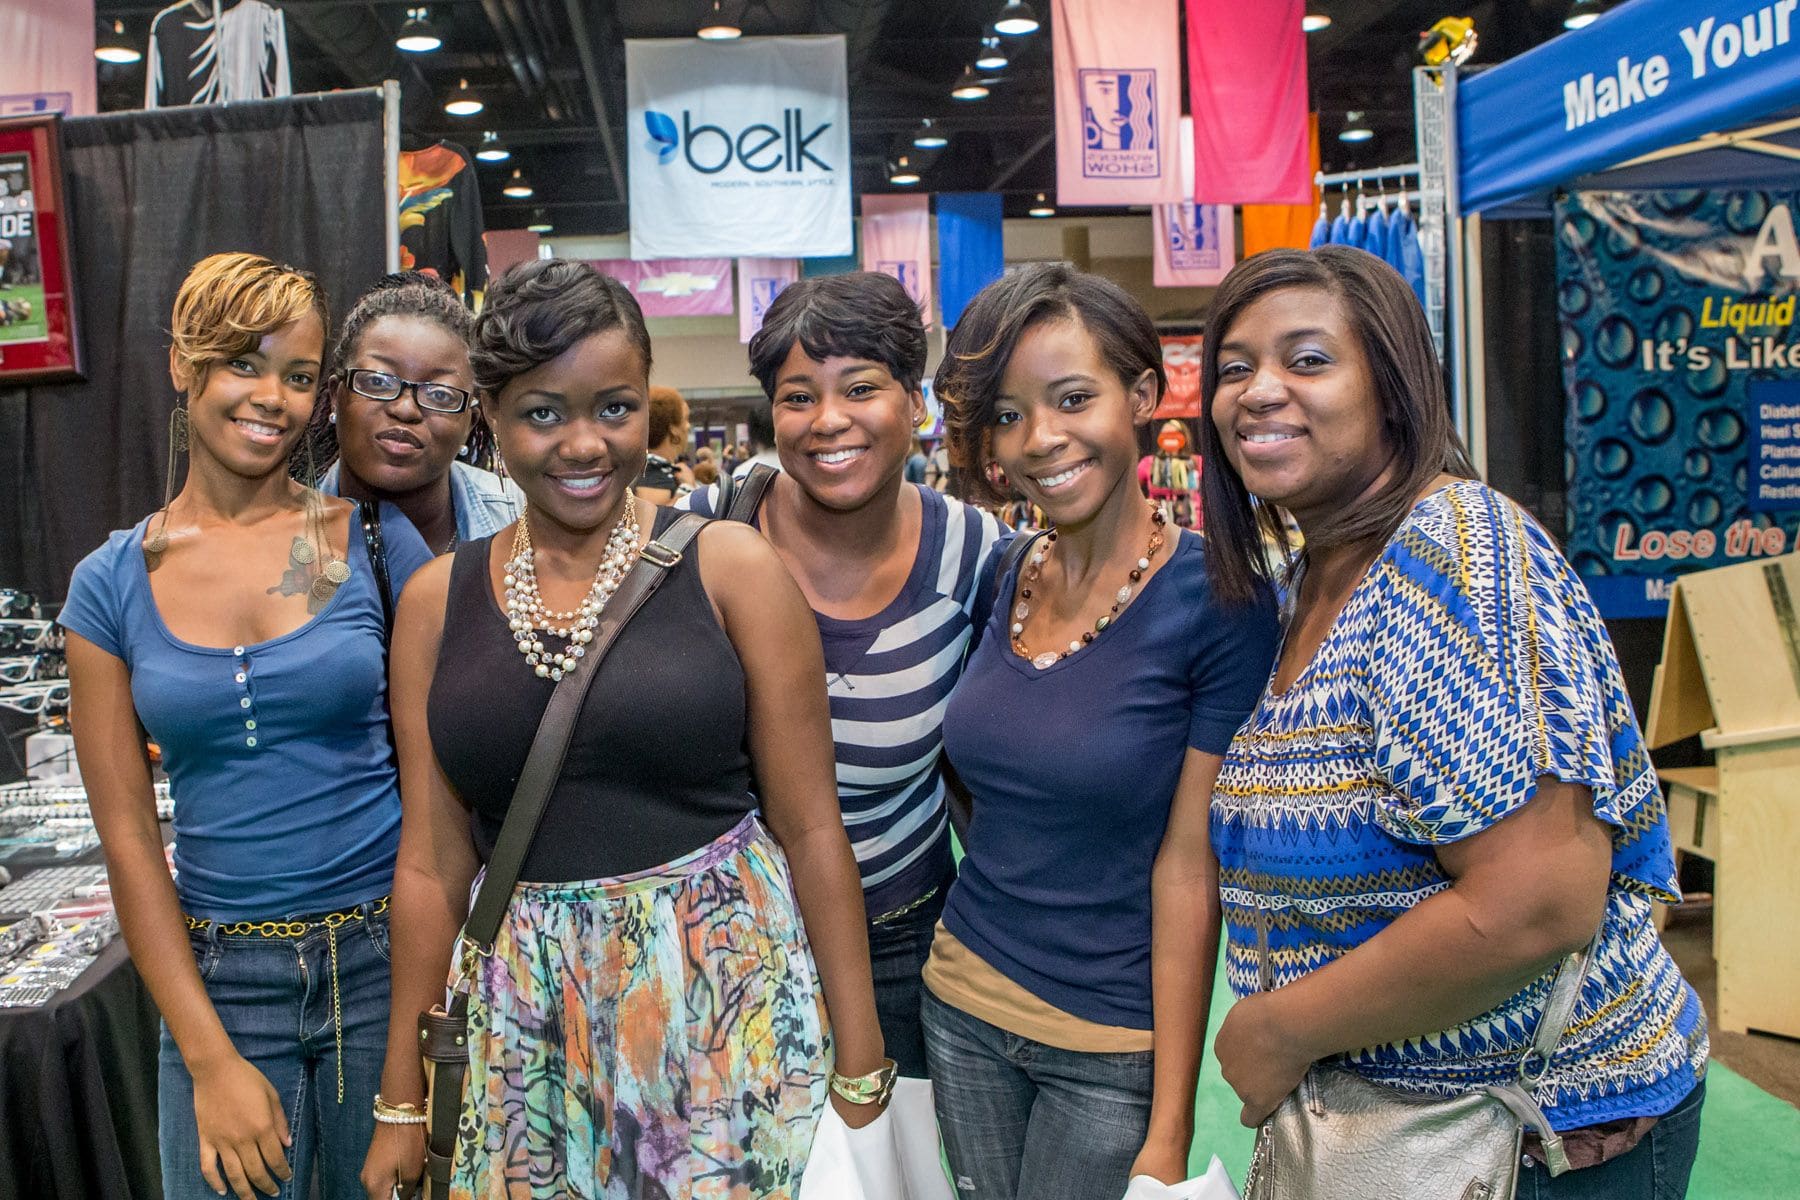 Cute Group Shop, sample, share the fun! Southern Women's Show is happening Oct. 4-6, use code BHAMNOW for $4 off